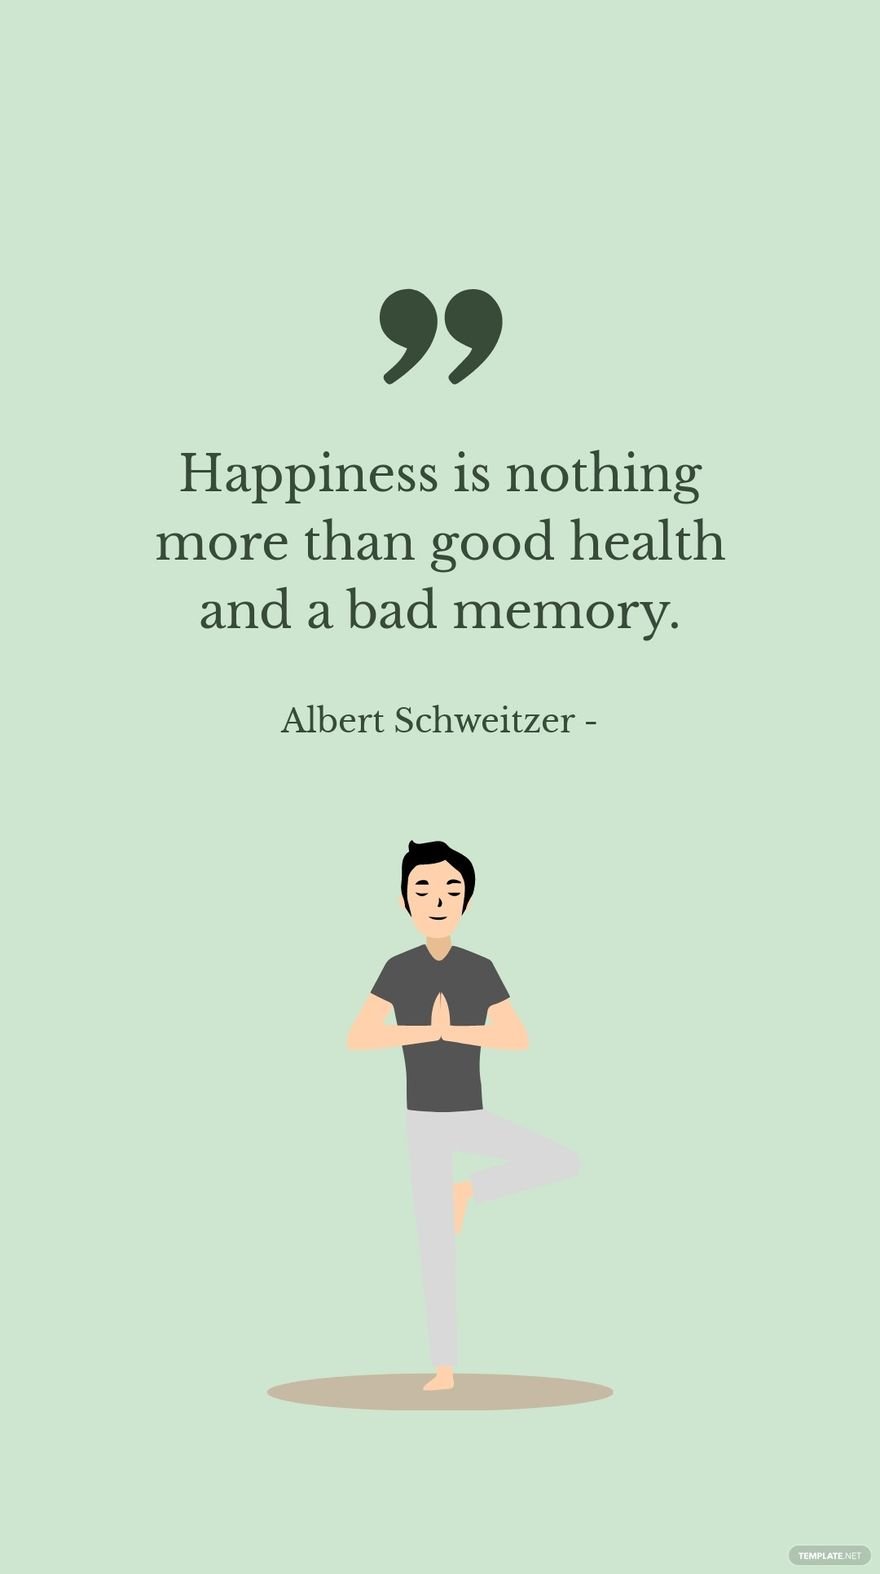 Free Albert Schweitzer - Happiness is nothing more than good health and a bad memory.